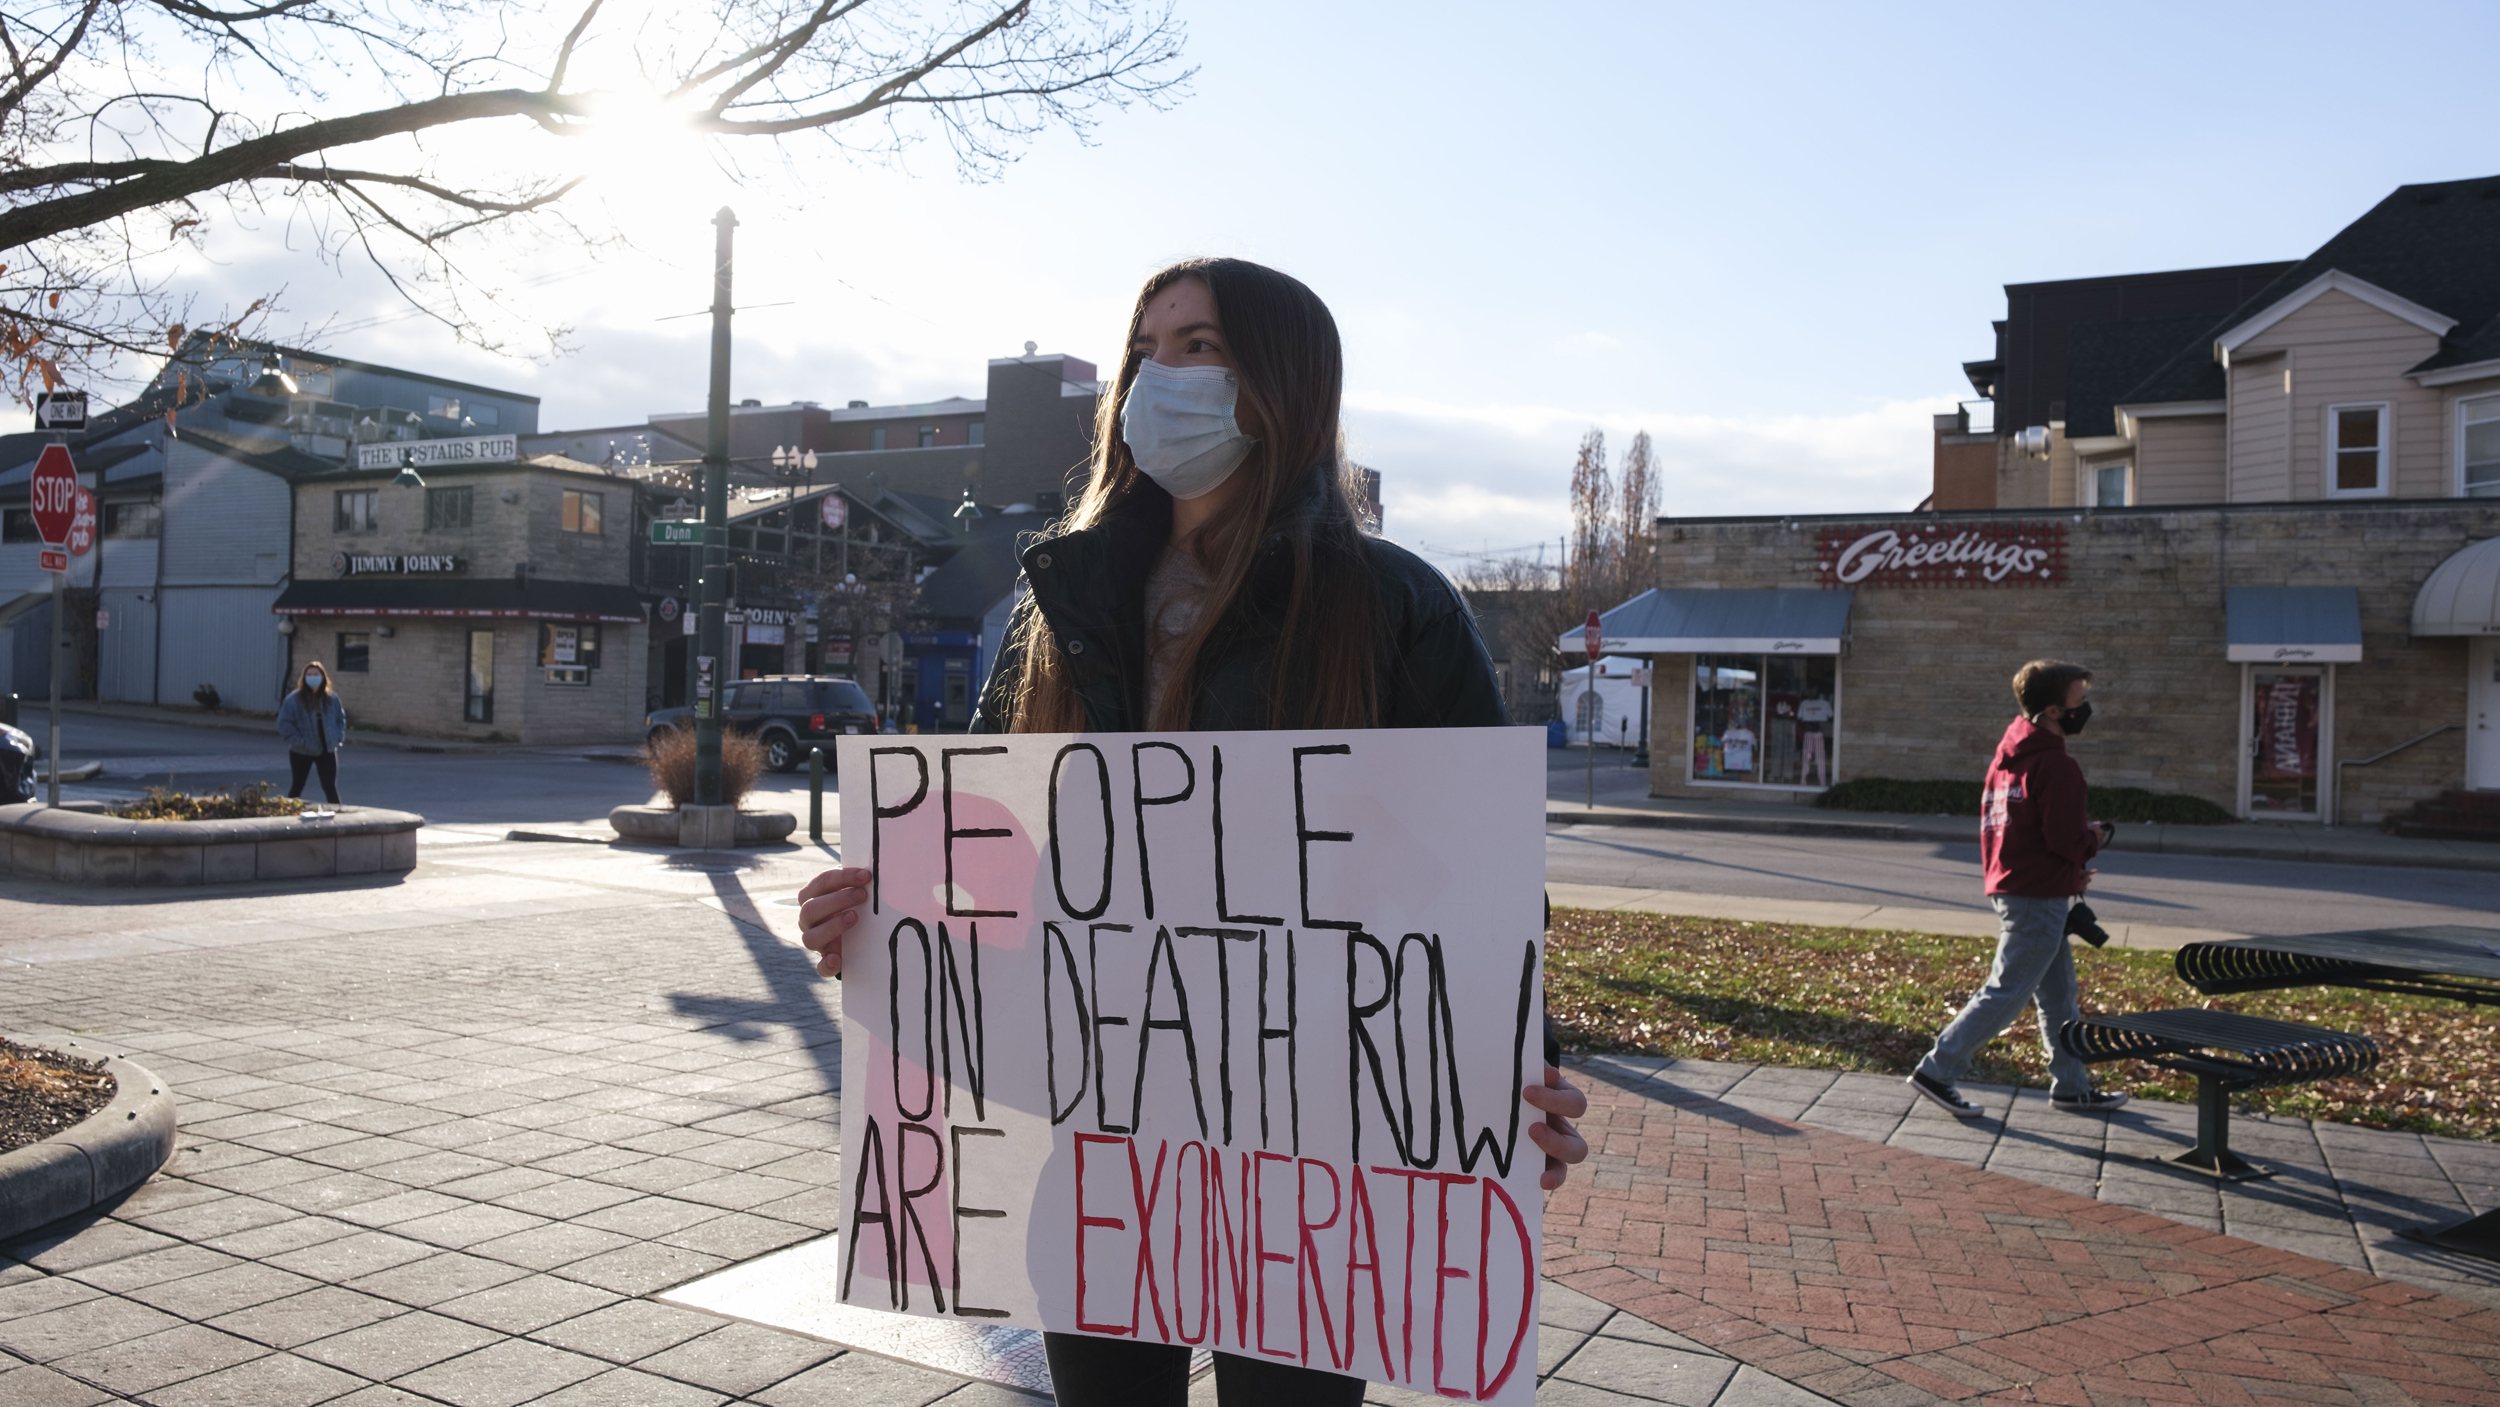 Woman Wearing A Facemask Holding People On Death Row Are Exonerated Sign